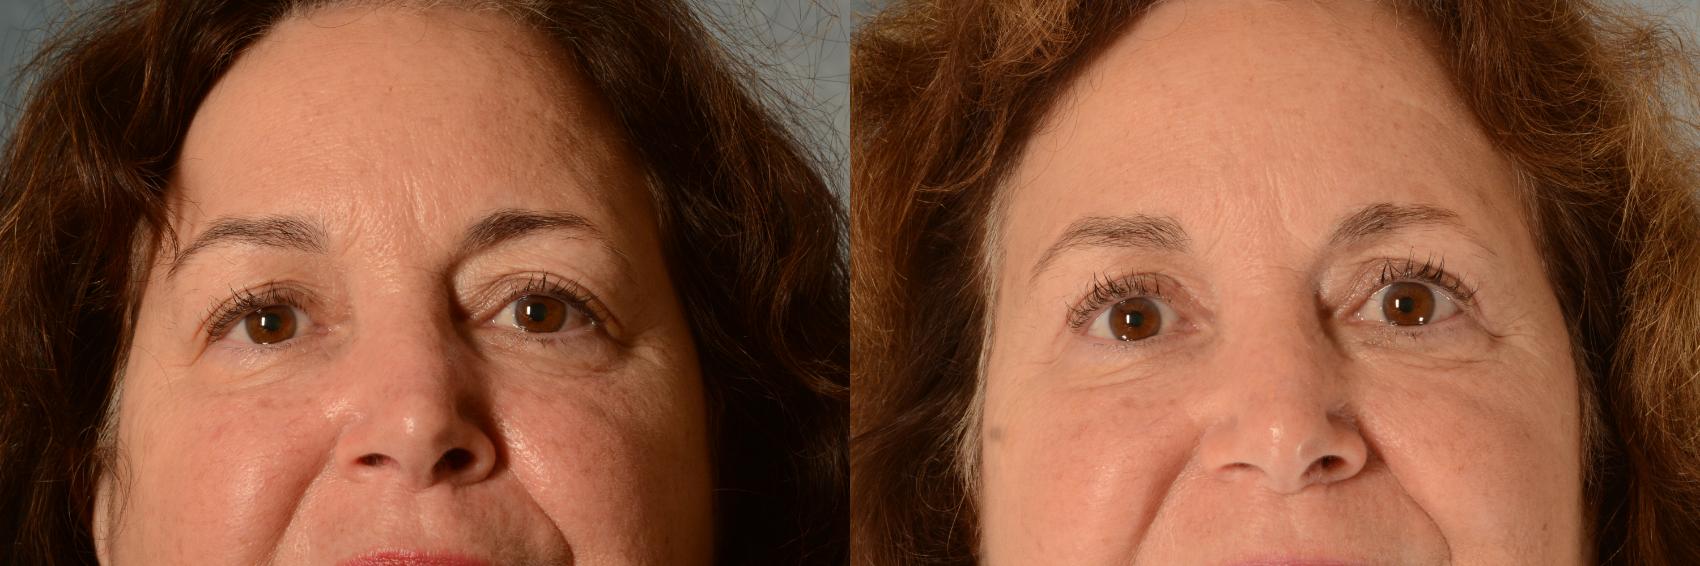 Before & After Eyelid Surgery (Blepharoplasty) Case 501 Front View in Tallahassee, FL